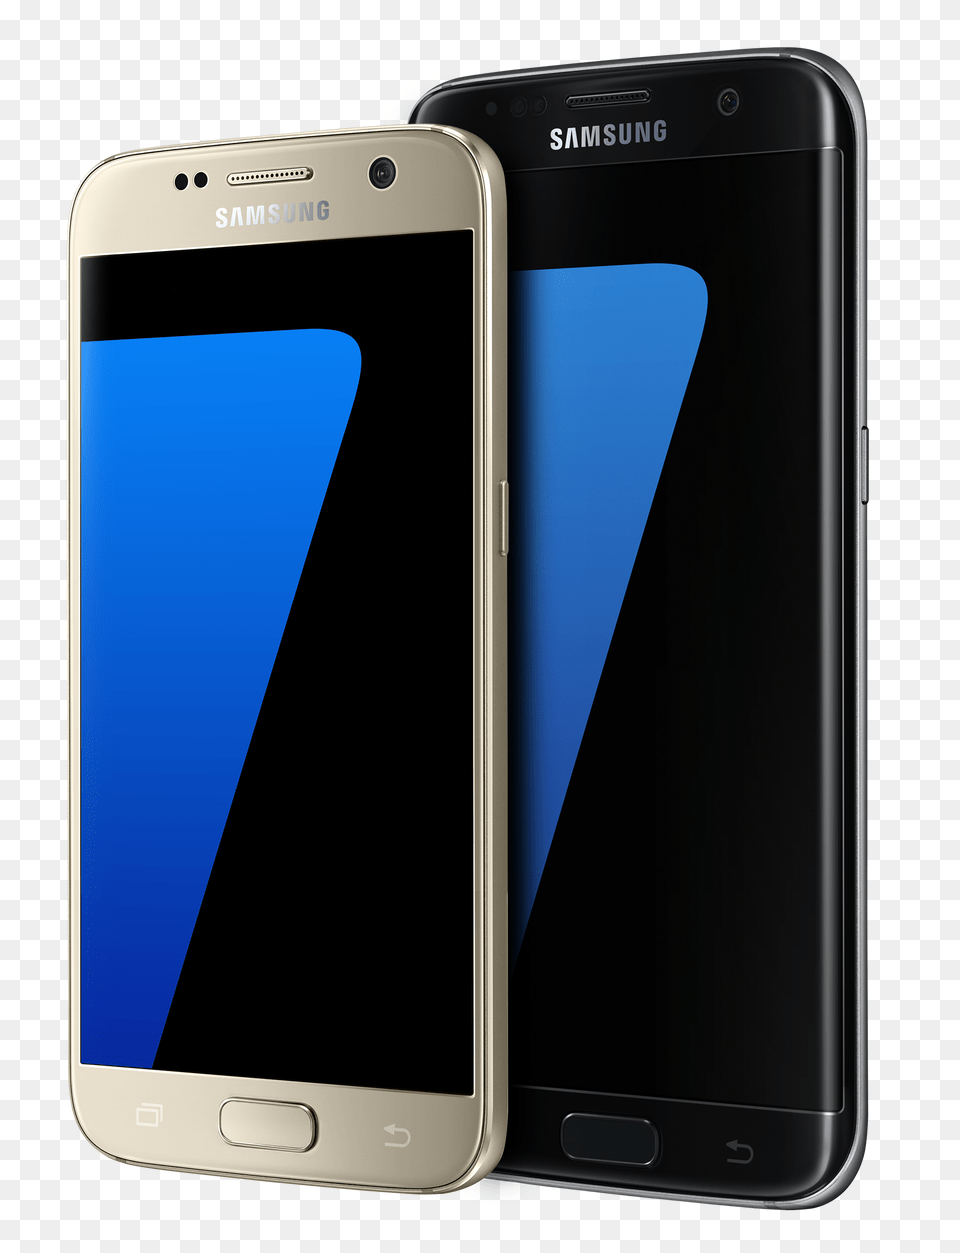 Samsung Galaxy And Galaxy Edge Official With New Camera, Electronics, Mobile Phone, Phone, Iphone Png Image